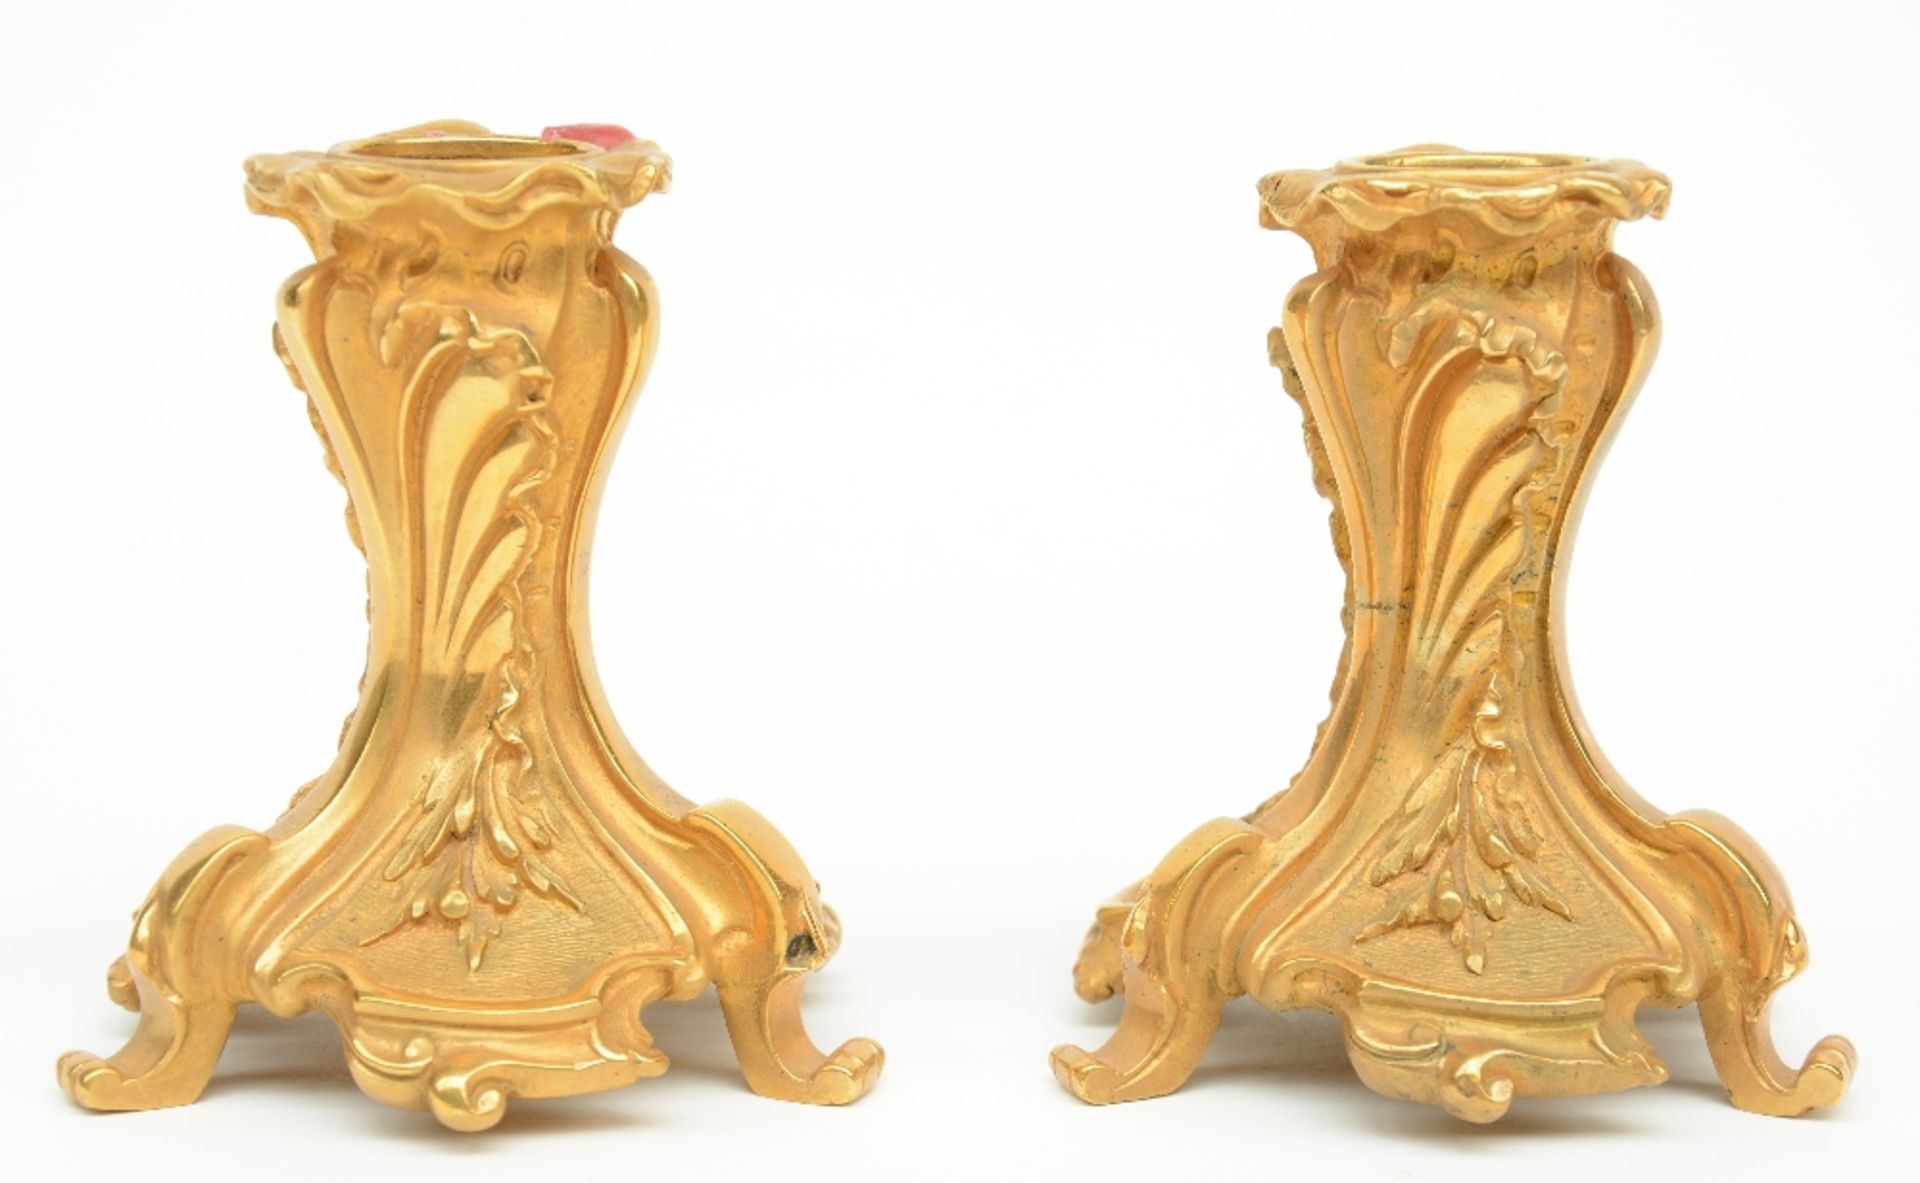 A fine LXV style ormolu bronze ink stand with a ditto pair of candlesticks, 19thC, H 9 - B 19 - D - Bild 5 aus 8